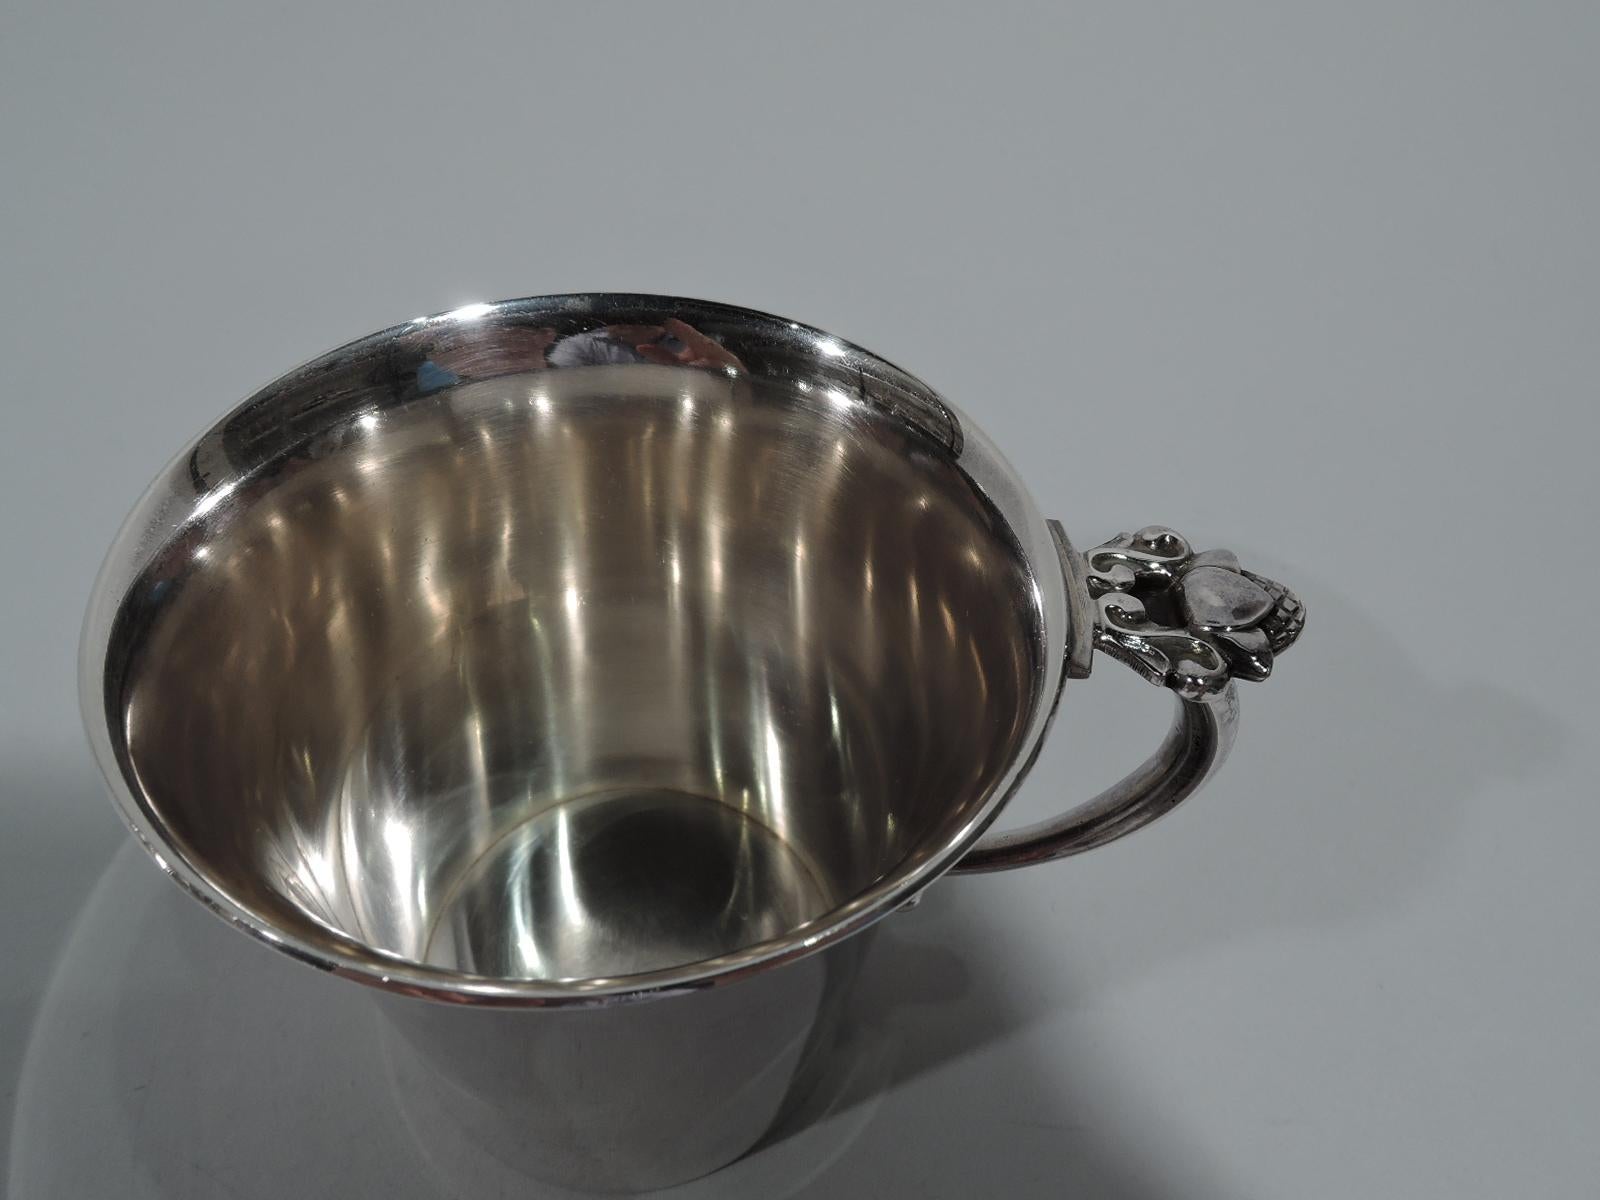 Sterling silver baby cup in symbolically potent Acorn pattern. Made by Georg Jensen in Copenhagen, after design by Johan Rohde. Straight sides, flared rim, and c-scroll handle. Handle capped with acorn. A great gift for a future oak. Early marks